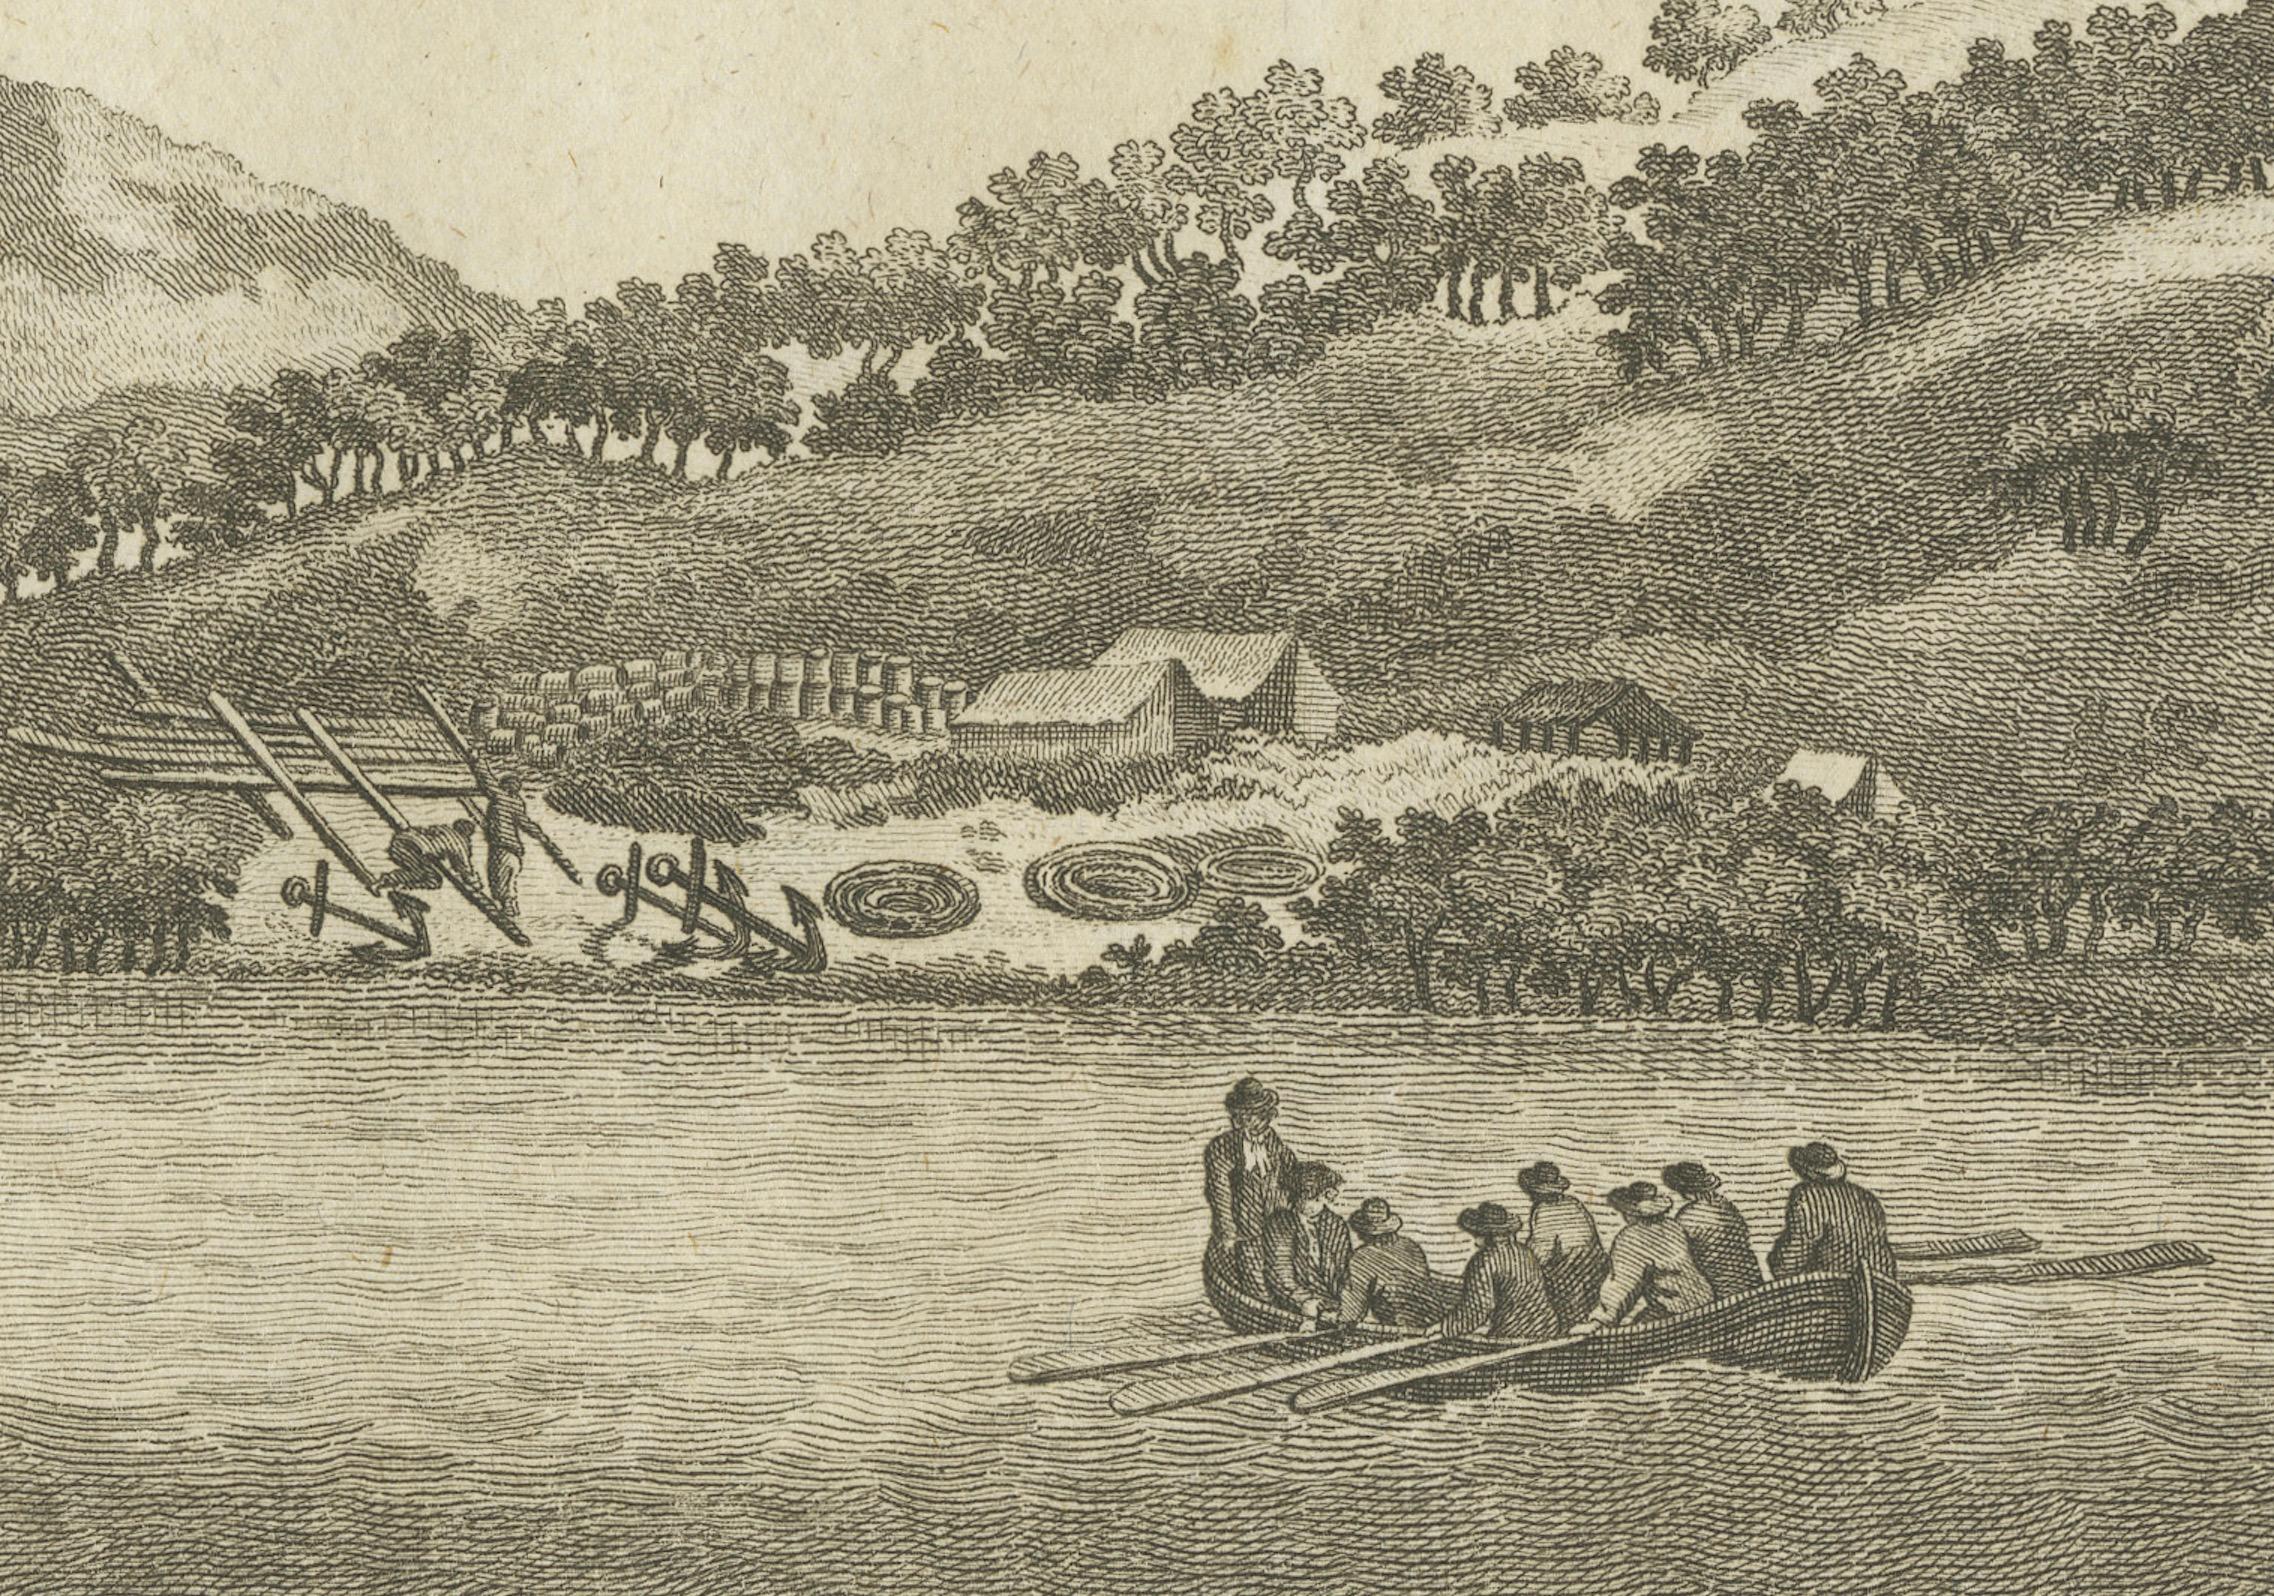 The engraving depicts a scene from one of Captain James Cook's voyages. The text below the image reads: 